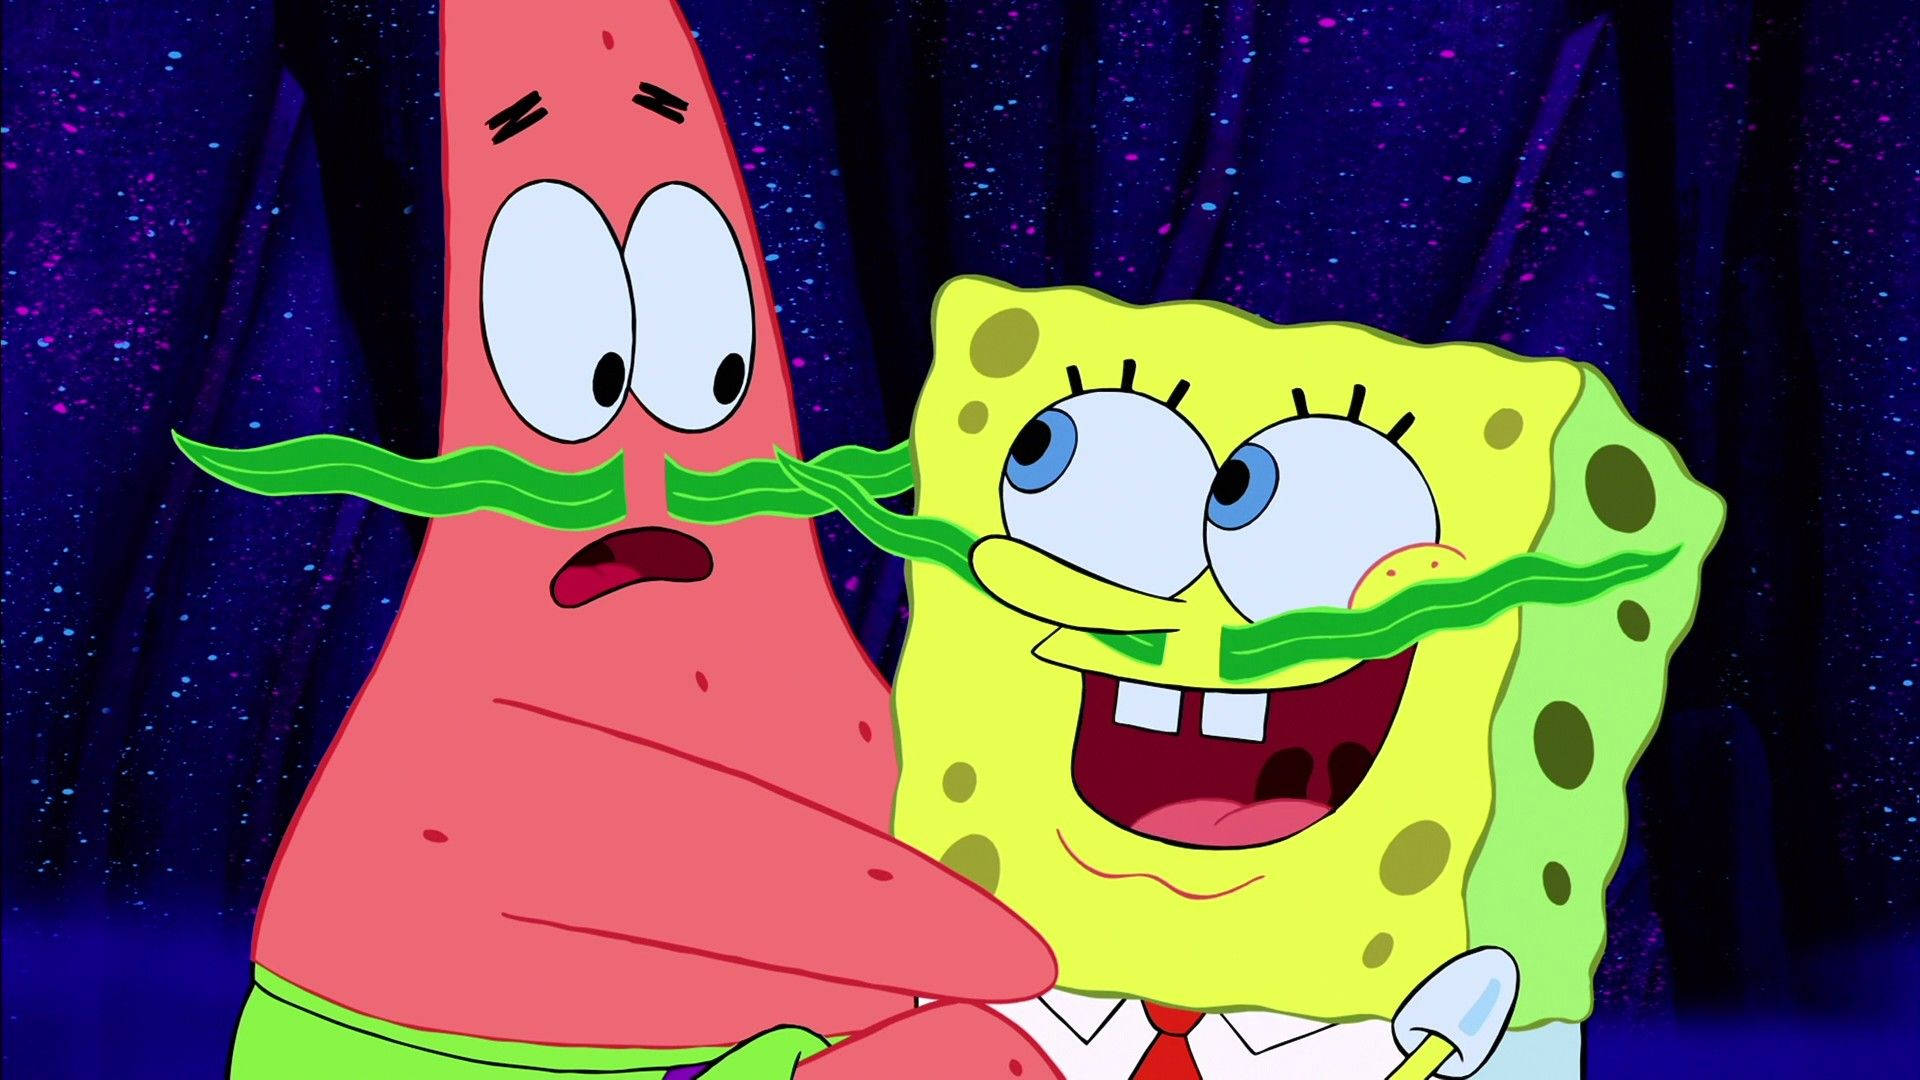 Spongebob And Patrick With Seaweed Mustaches Background